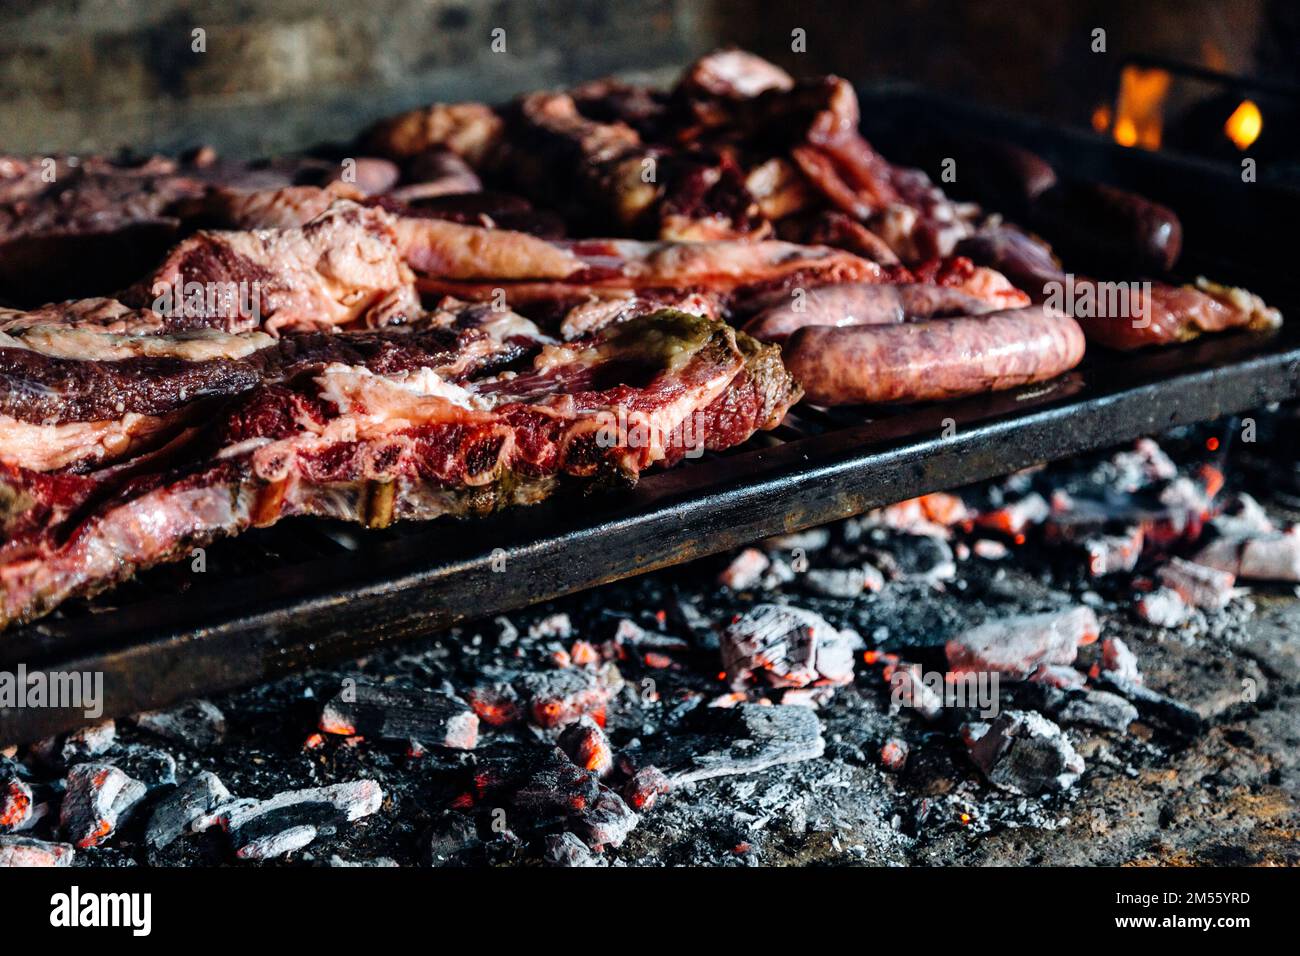 Premium Photo  Parrilla argentina traditional barbecue made with straight  from the wood